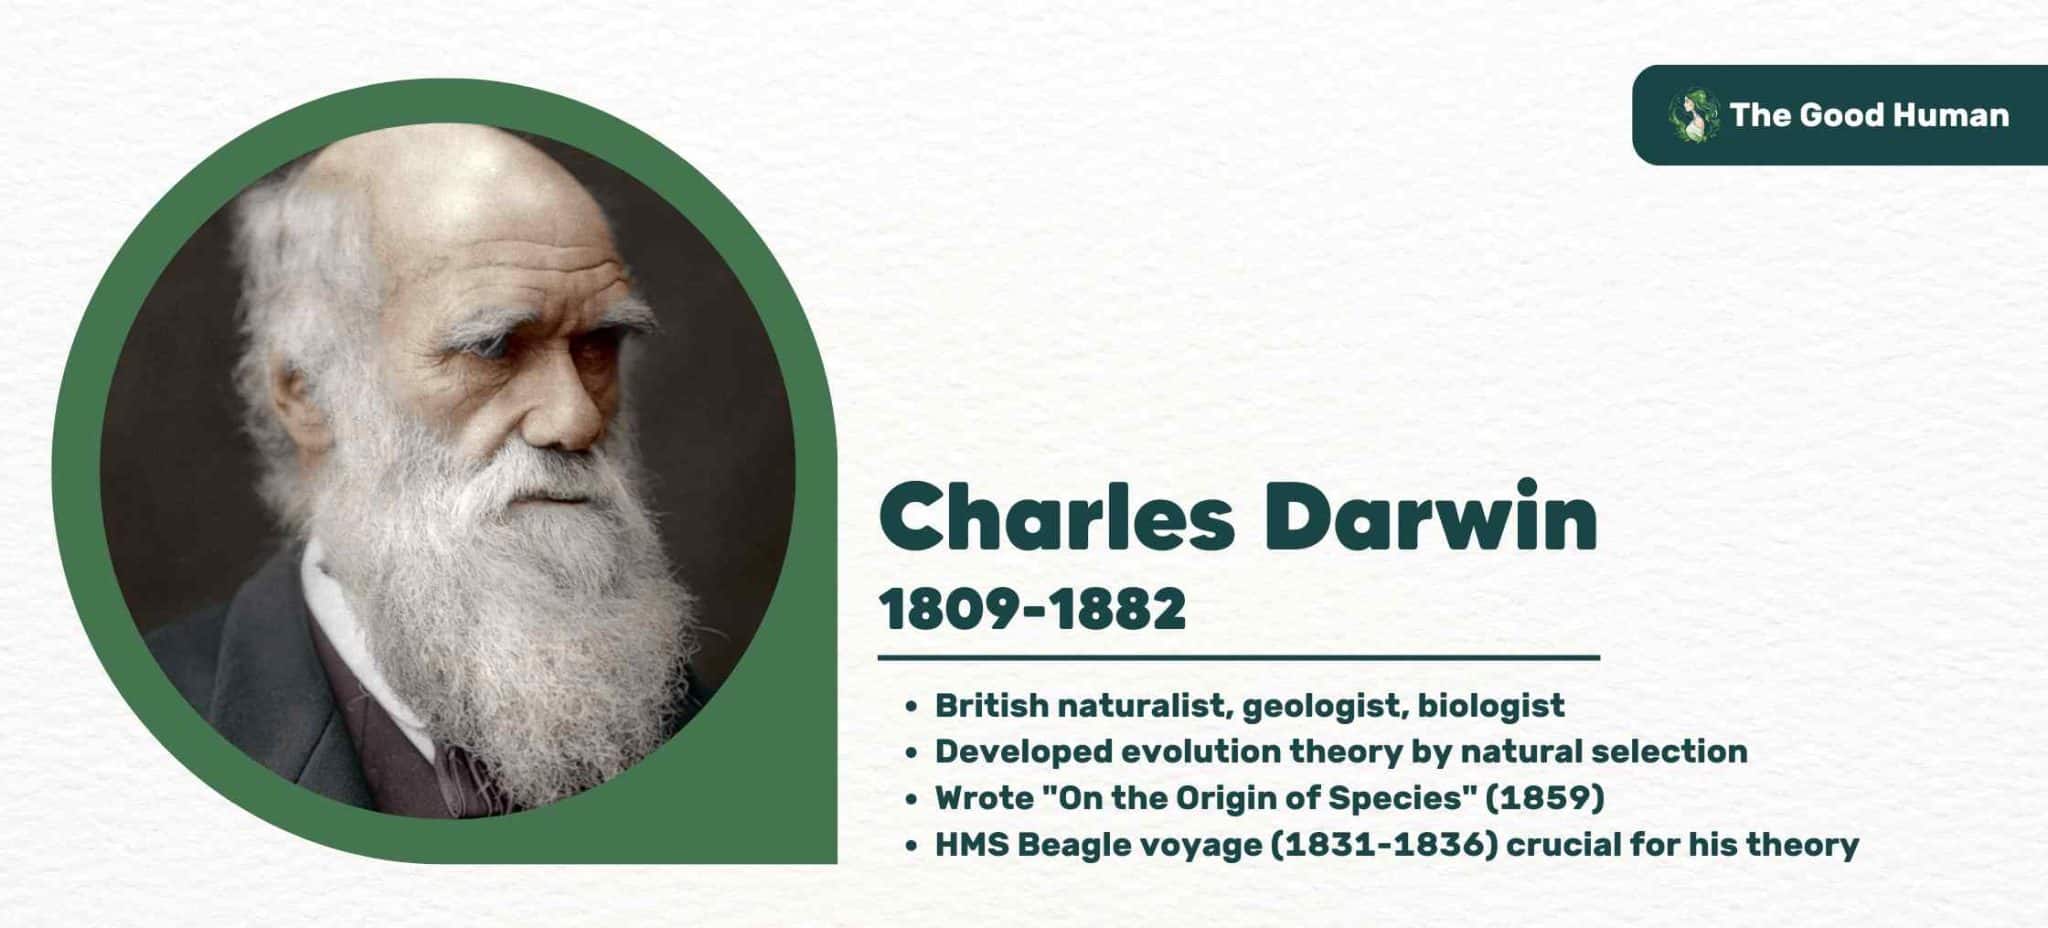 About Charles Darwin